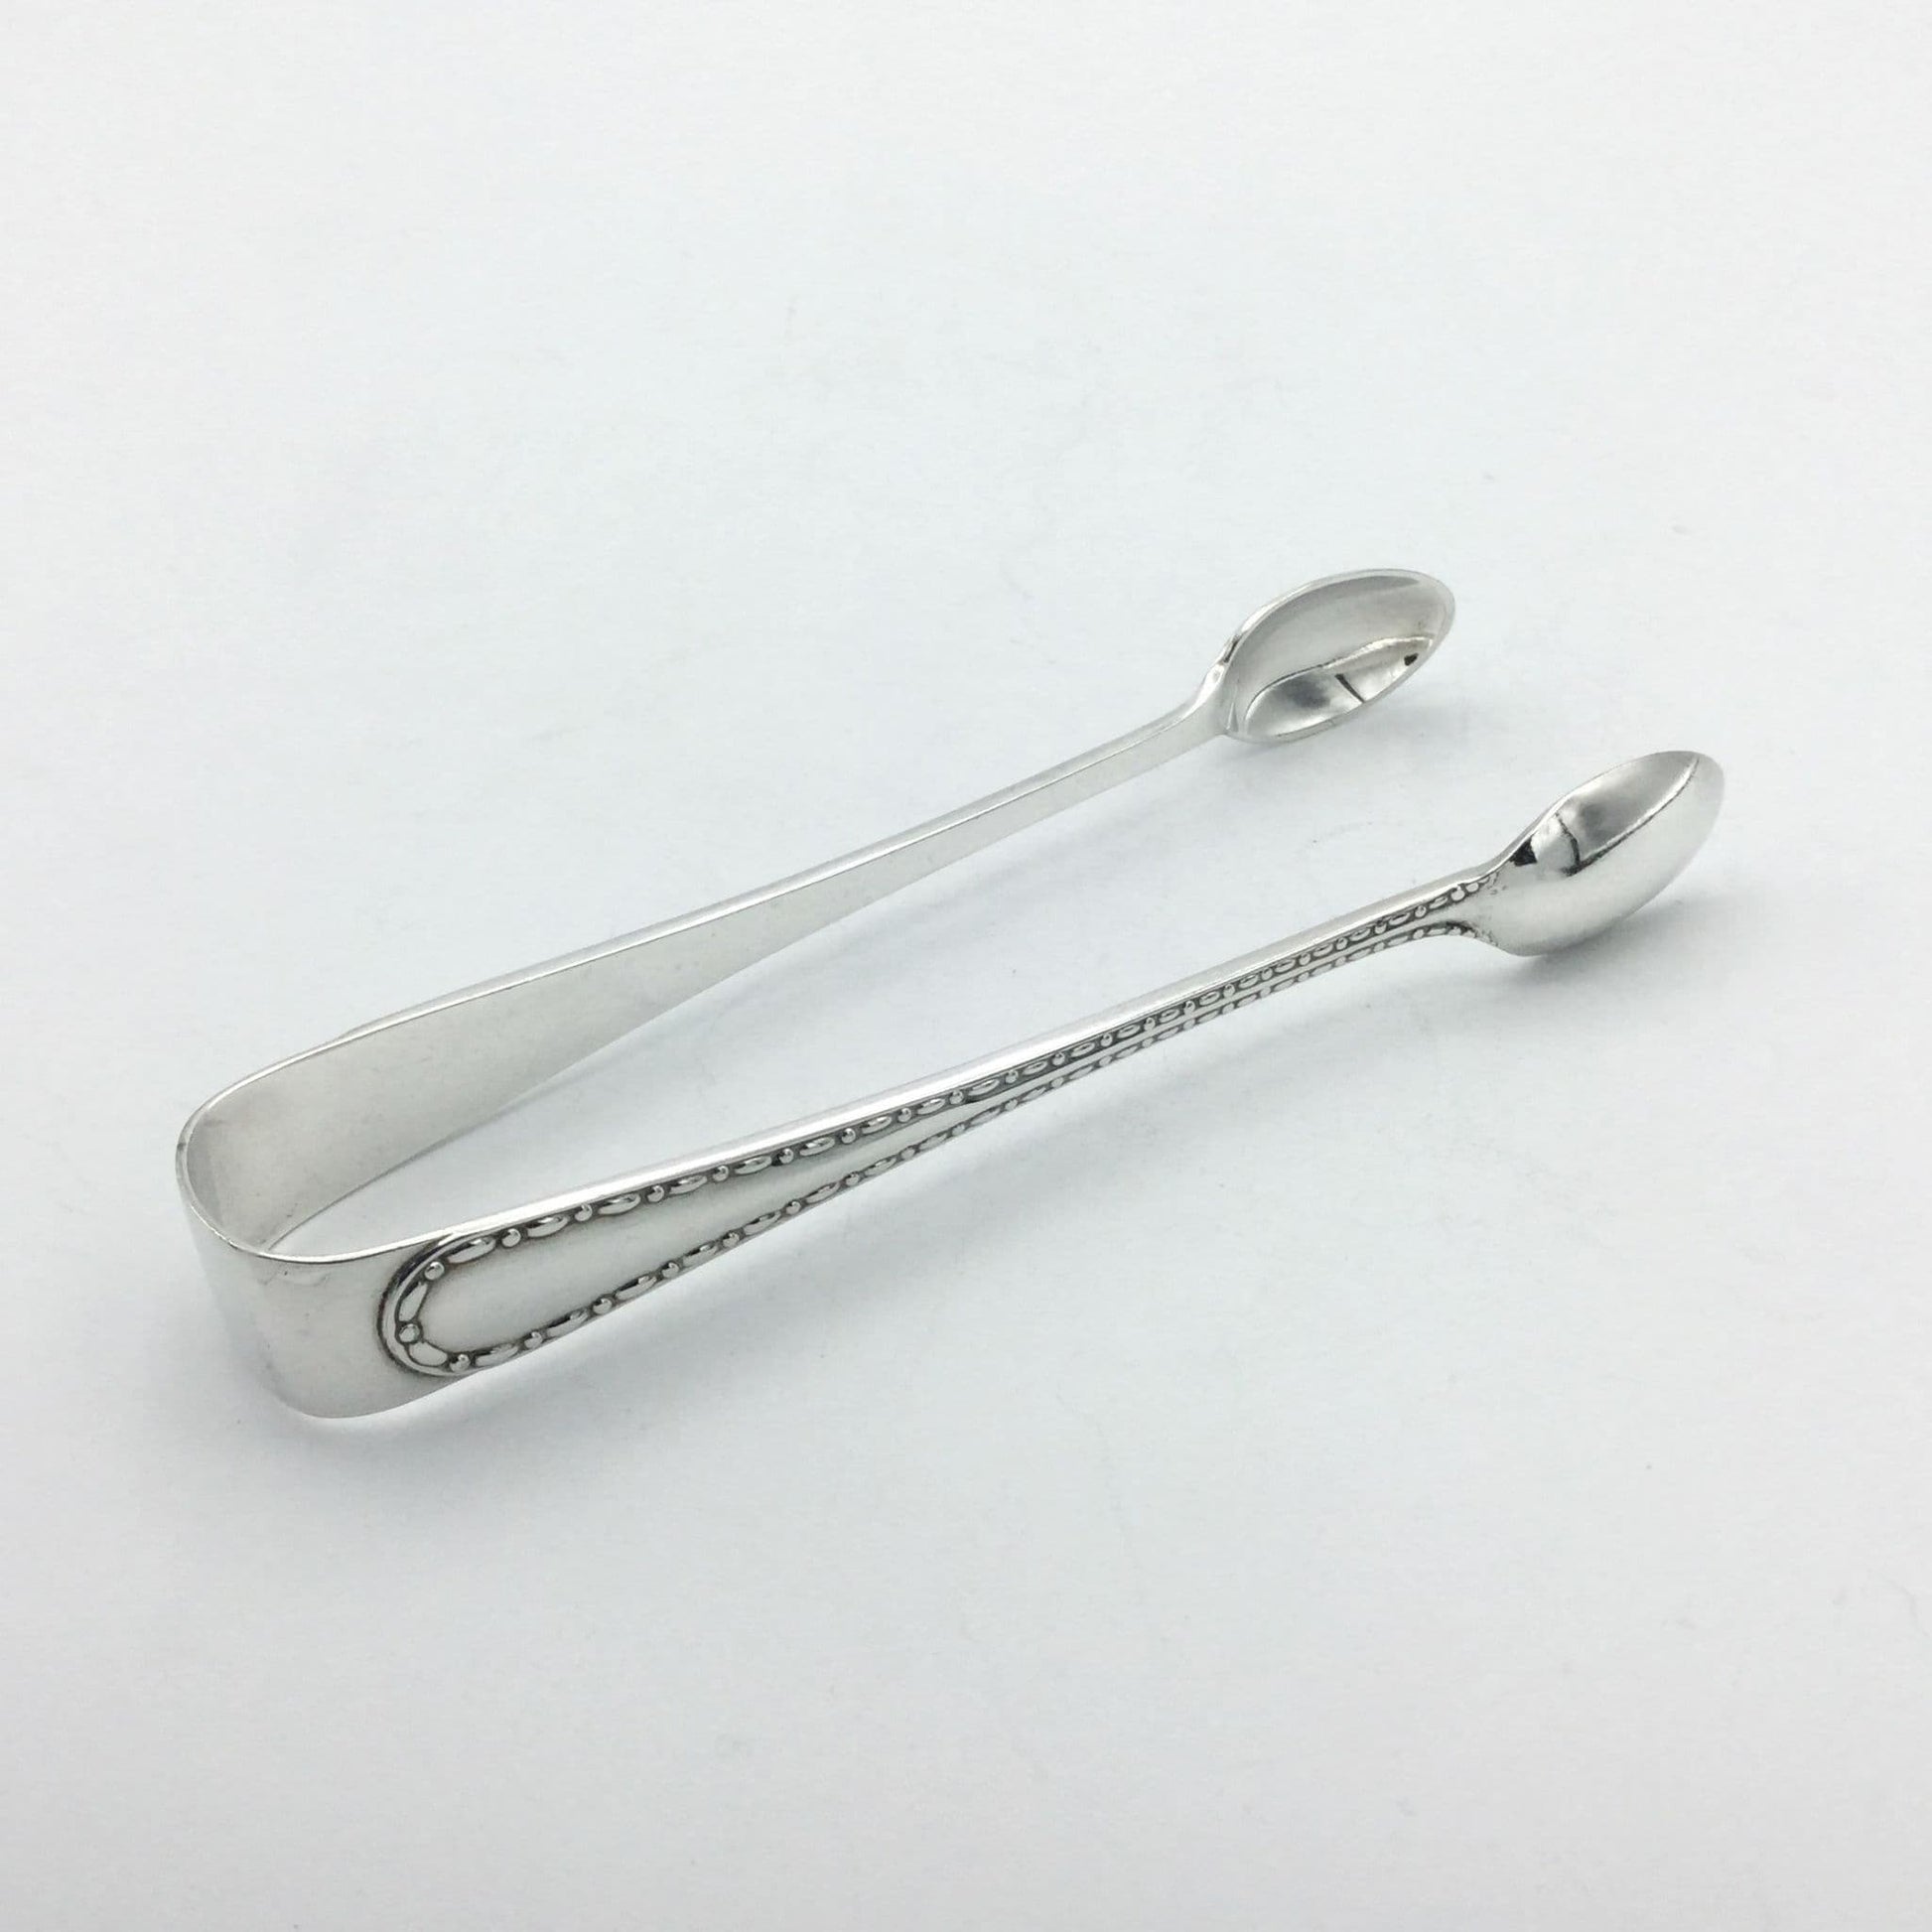 silvere sugar tongs pointing away from camera showing pattern on arm